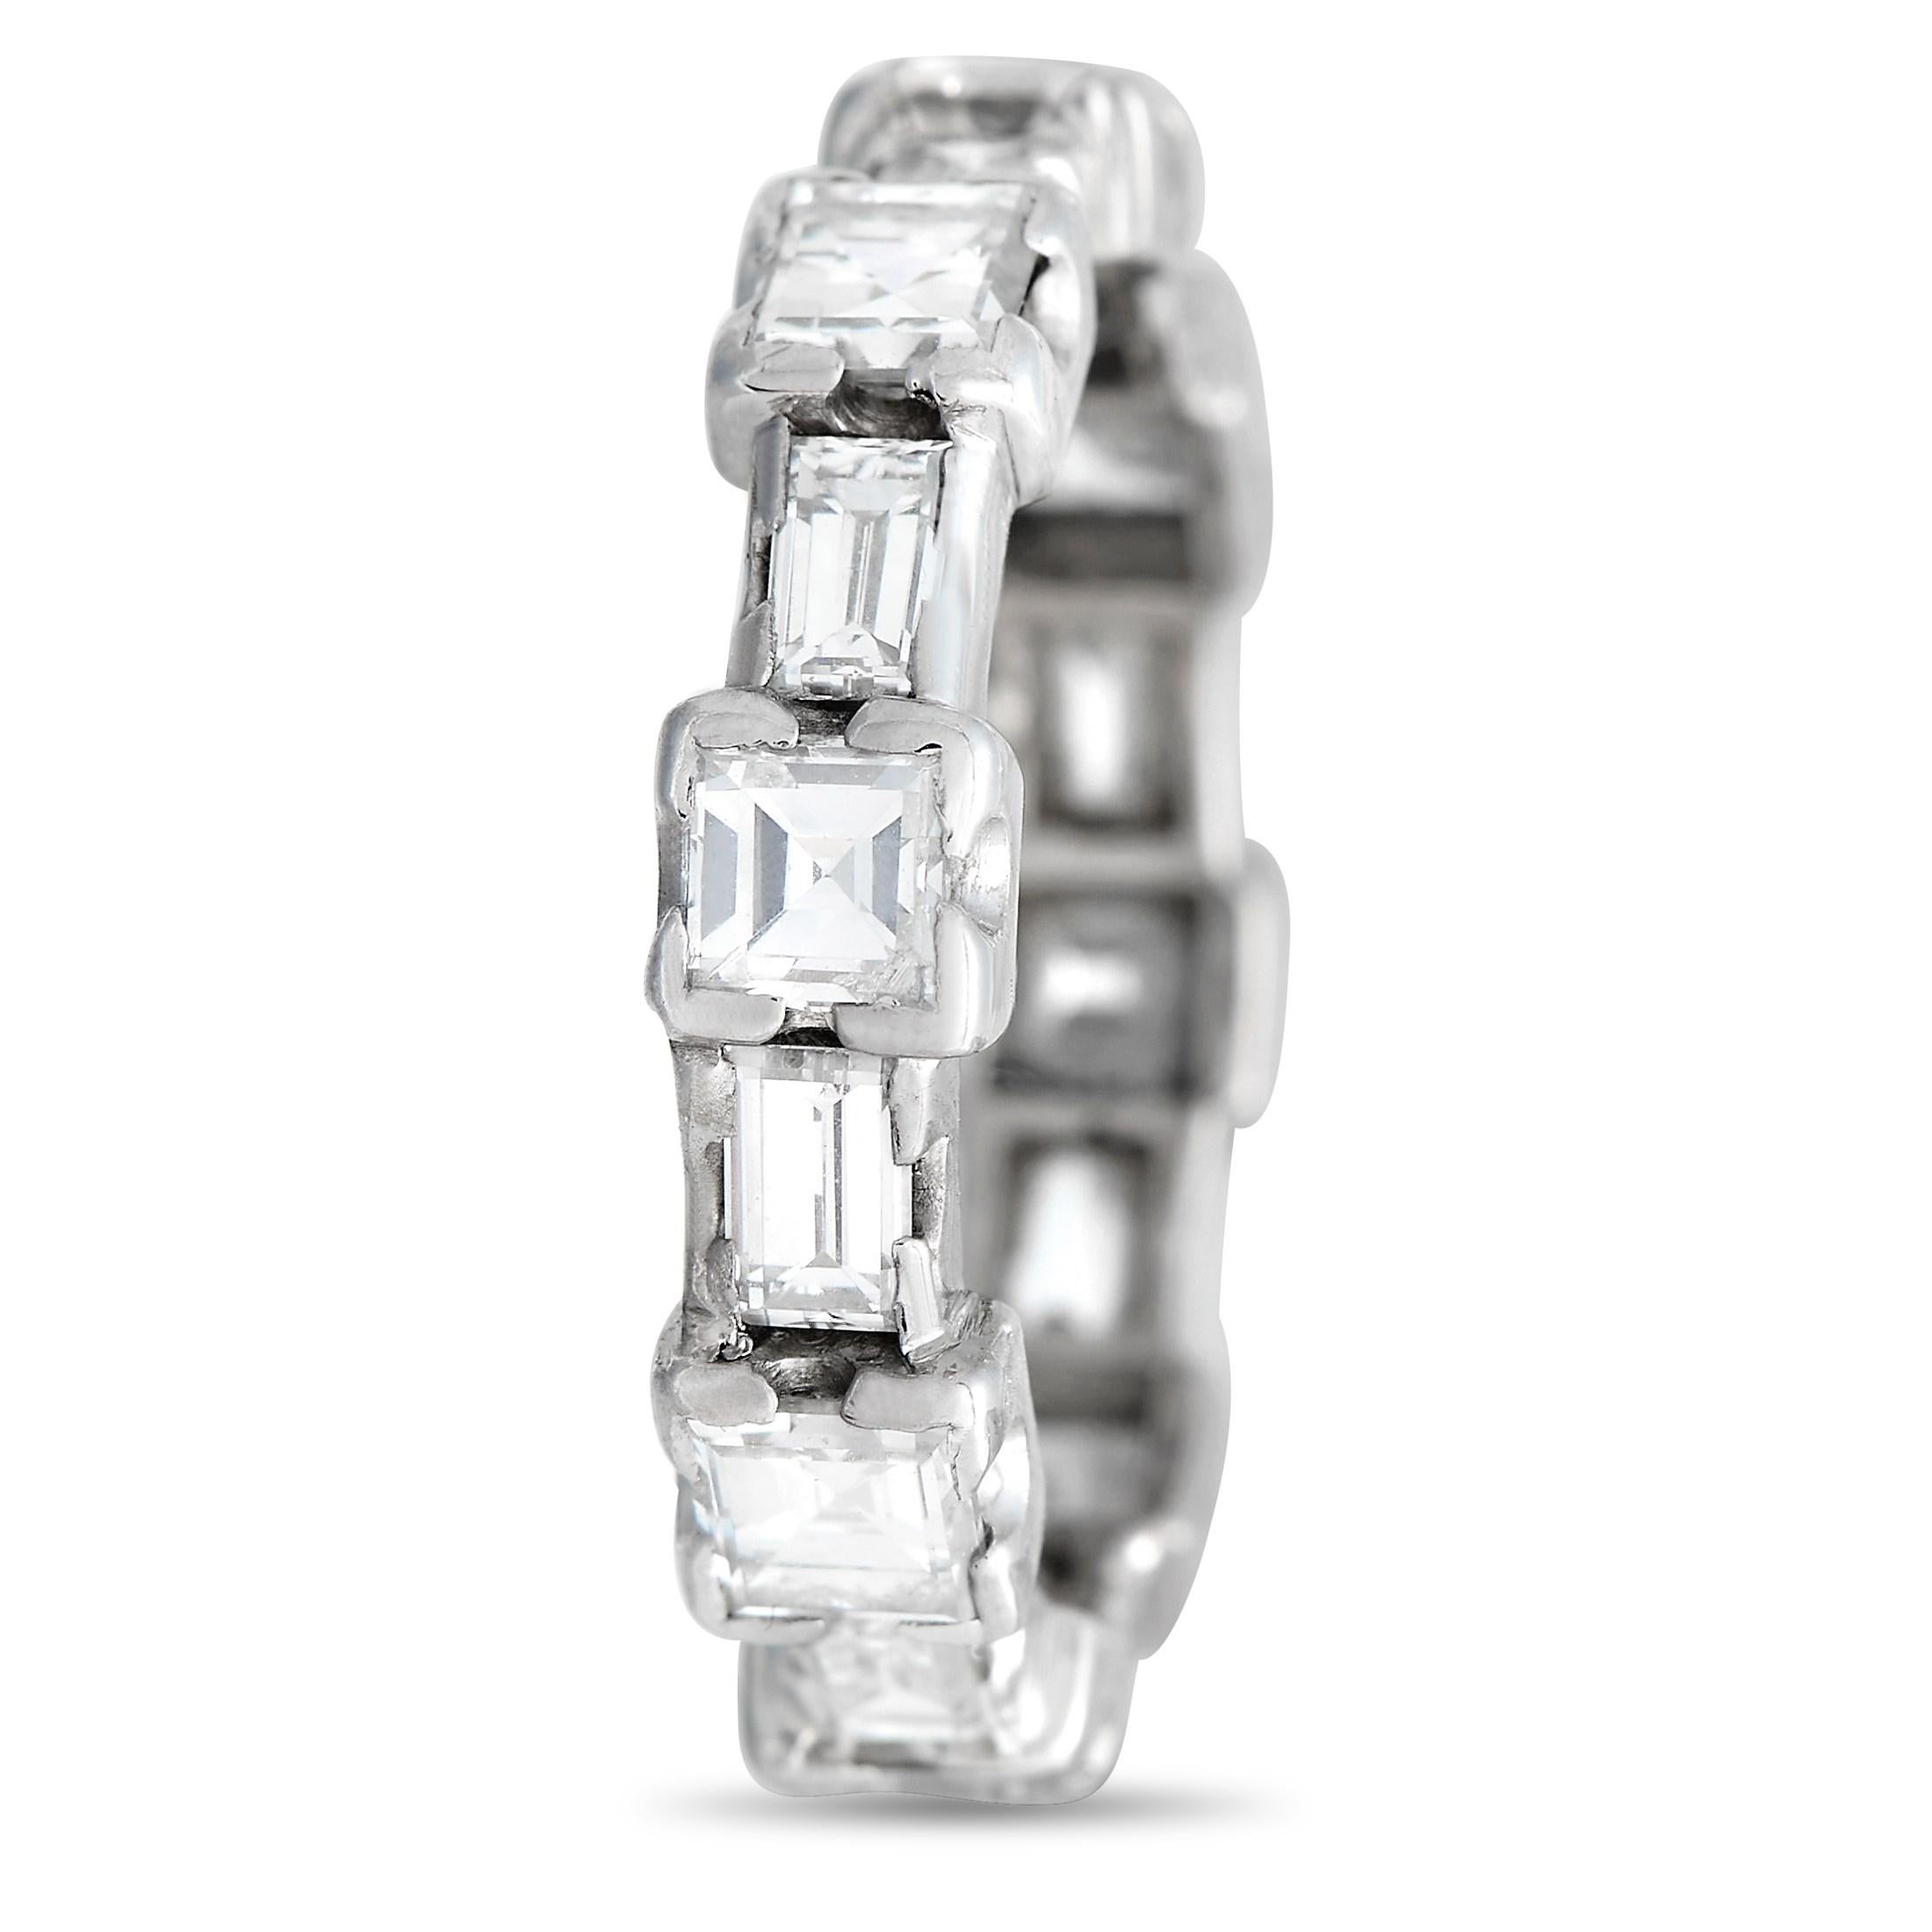 You'll find yourself falling in love with the geometric quality of this diamond ring. On a 4mm white gold band are alternating diamonds in two different cuts. Their faceted beauty flatters the finger and offers an edgier sparkle. This ring weighs